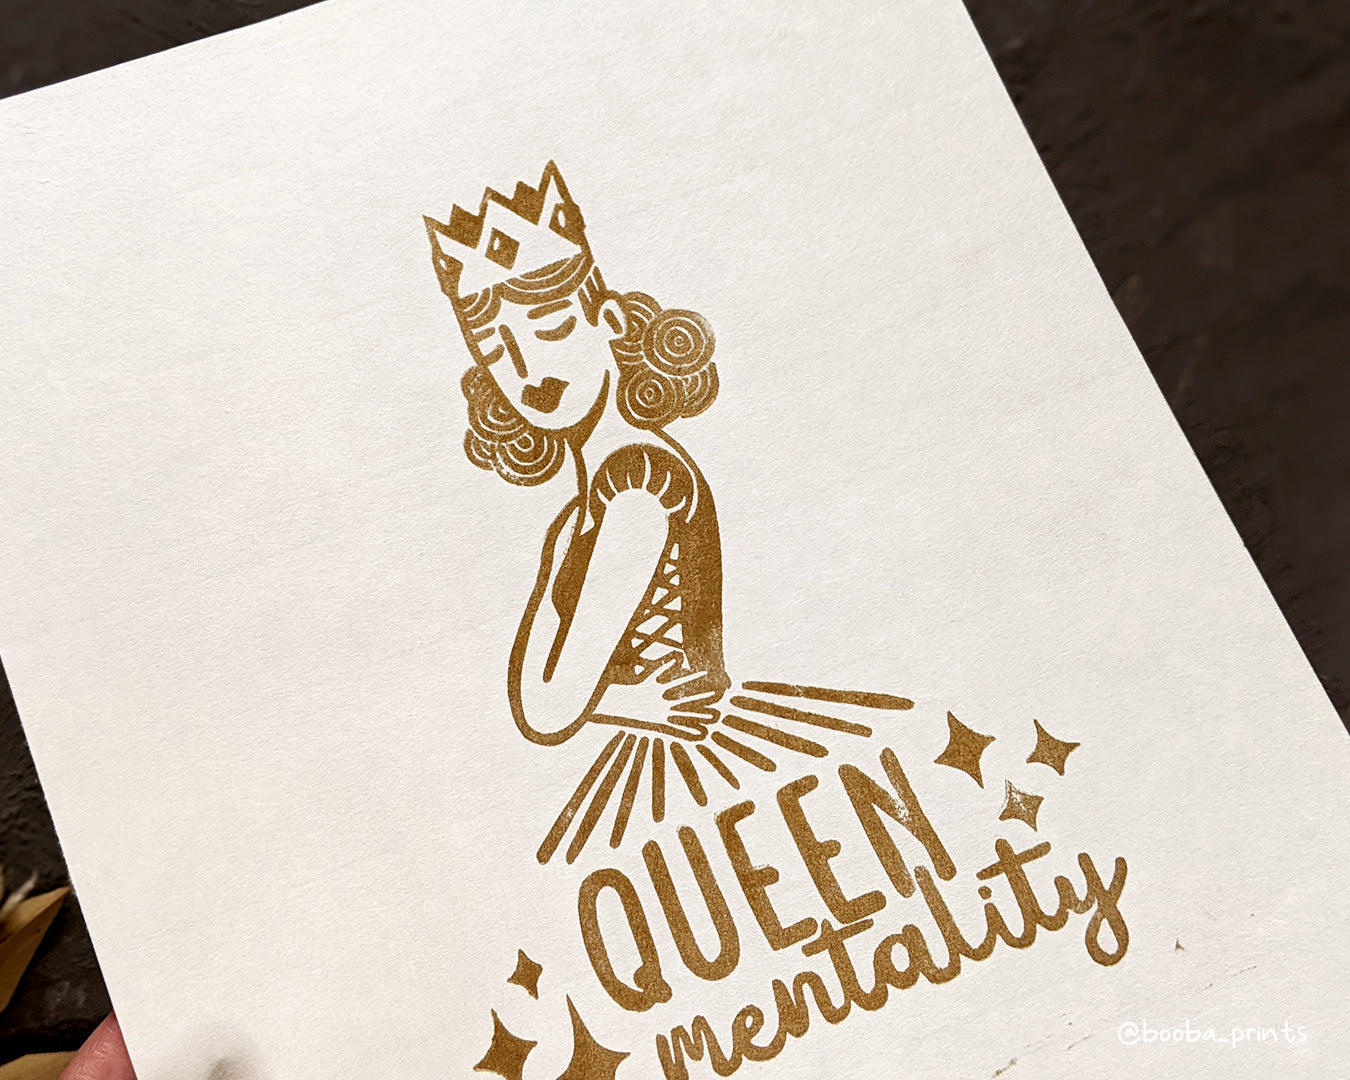 Handmade linocut print of Queen Mentality. Stylized illustration of a queen hugging herself and the text queen mentality. Printed with black or gold oil based ink on natural or Hosho paper. Empowering print for home decor. Super Seconds Festival, sale of samples and seconds. Artwork by Booba Prints.